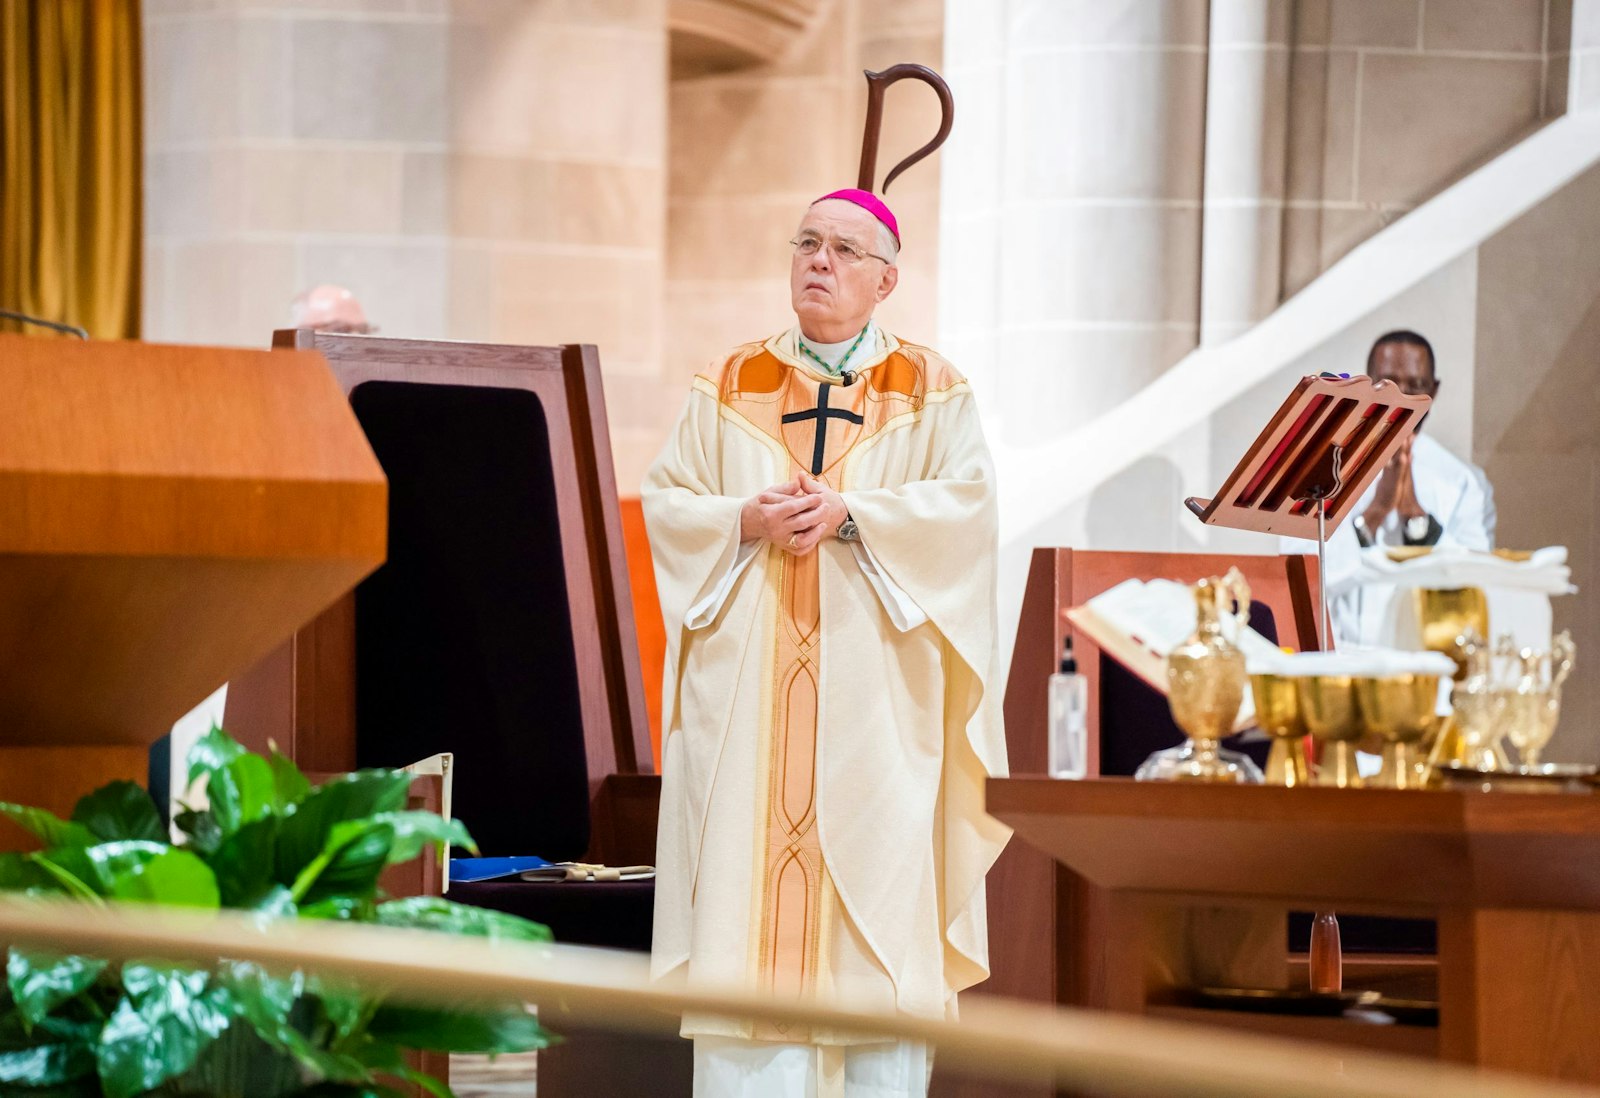 Bishop Hanchon presides at a Mass celebrating the legacy of the Rev. Martin Luther King Jr. at the Cathedral of the Most Blessed Sacrament in January 2021. (Valaurian Waller | Detroit Catholic)